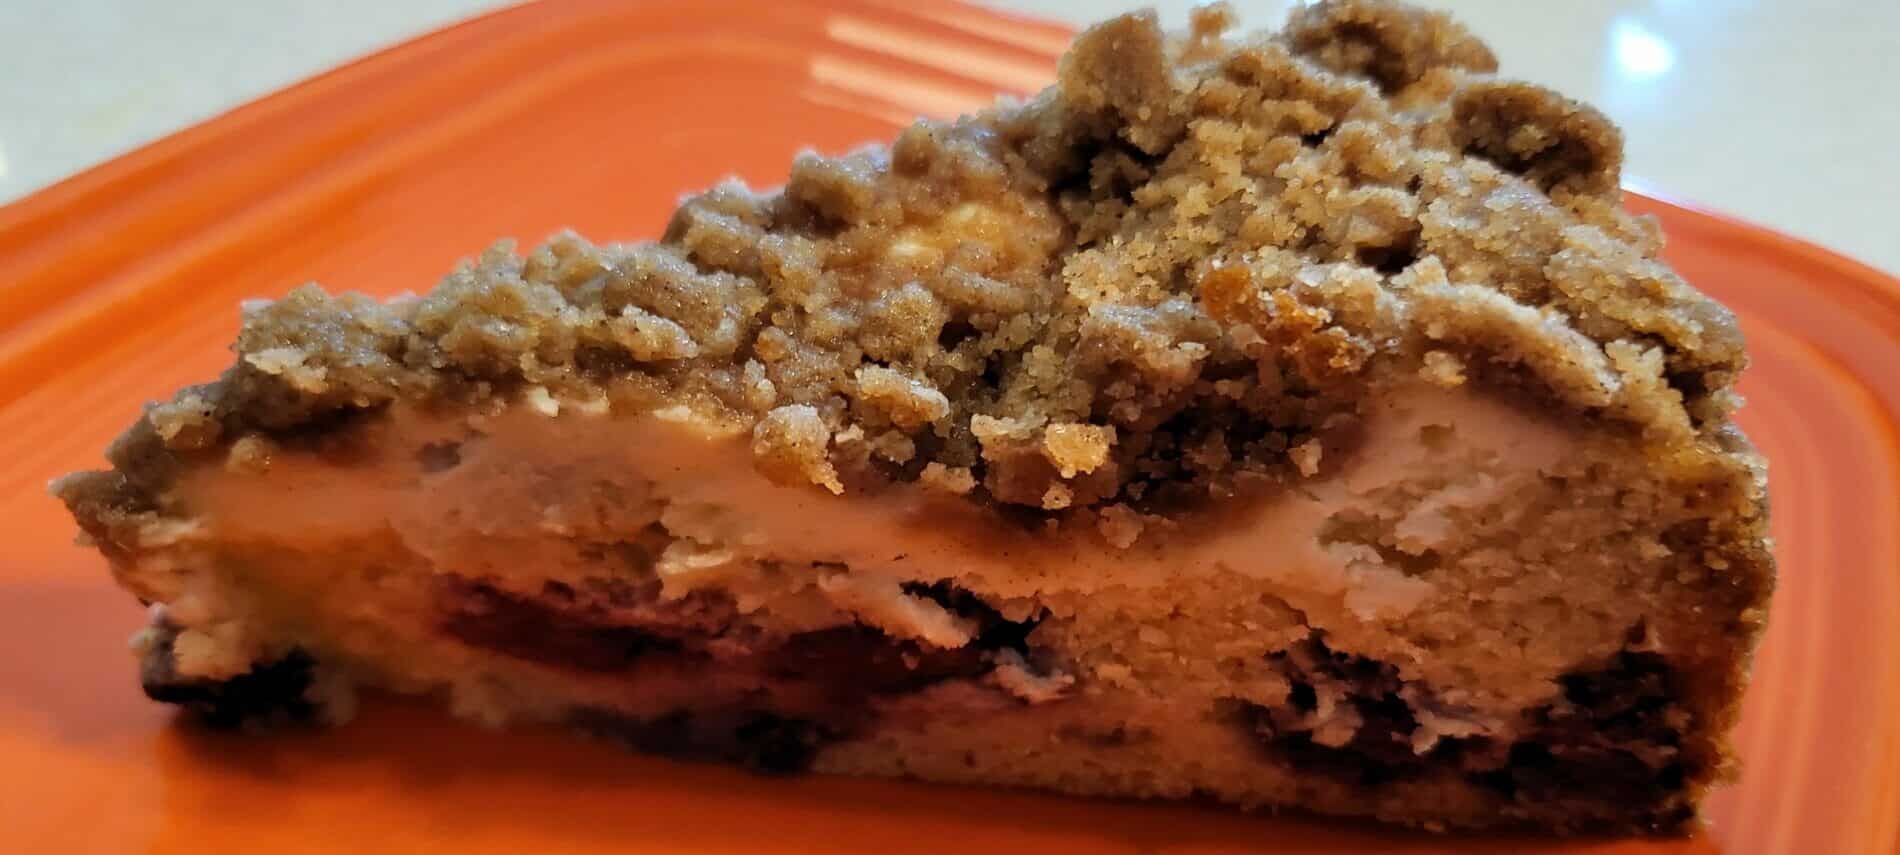 slice of coffee cakes with a crumble topping, a cream cheese layer and cake layer with blackberries on orange plate